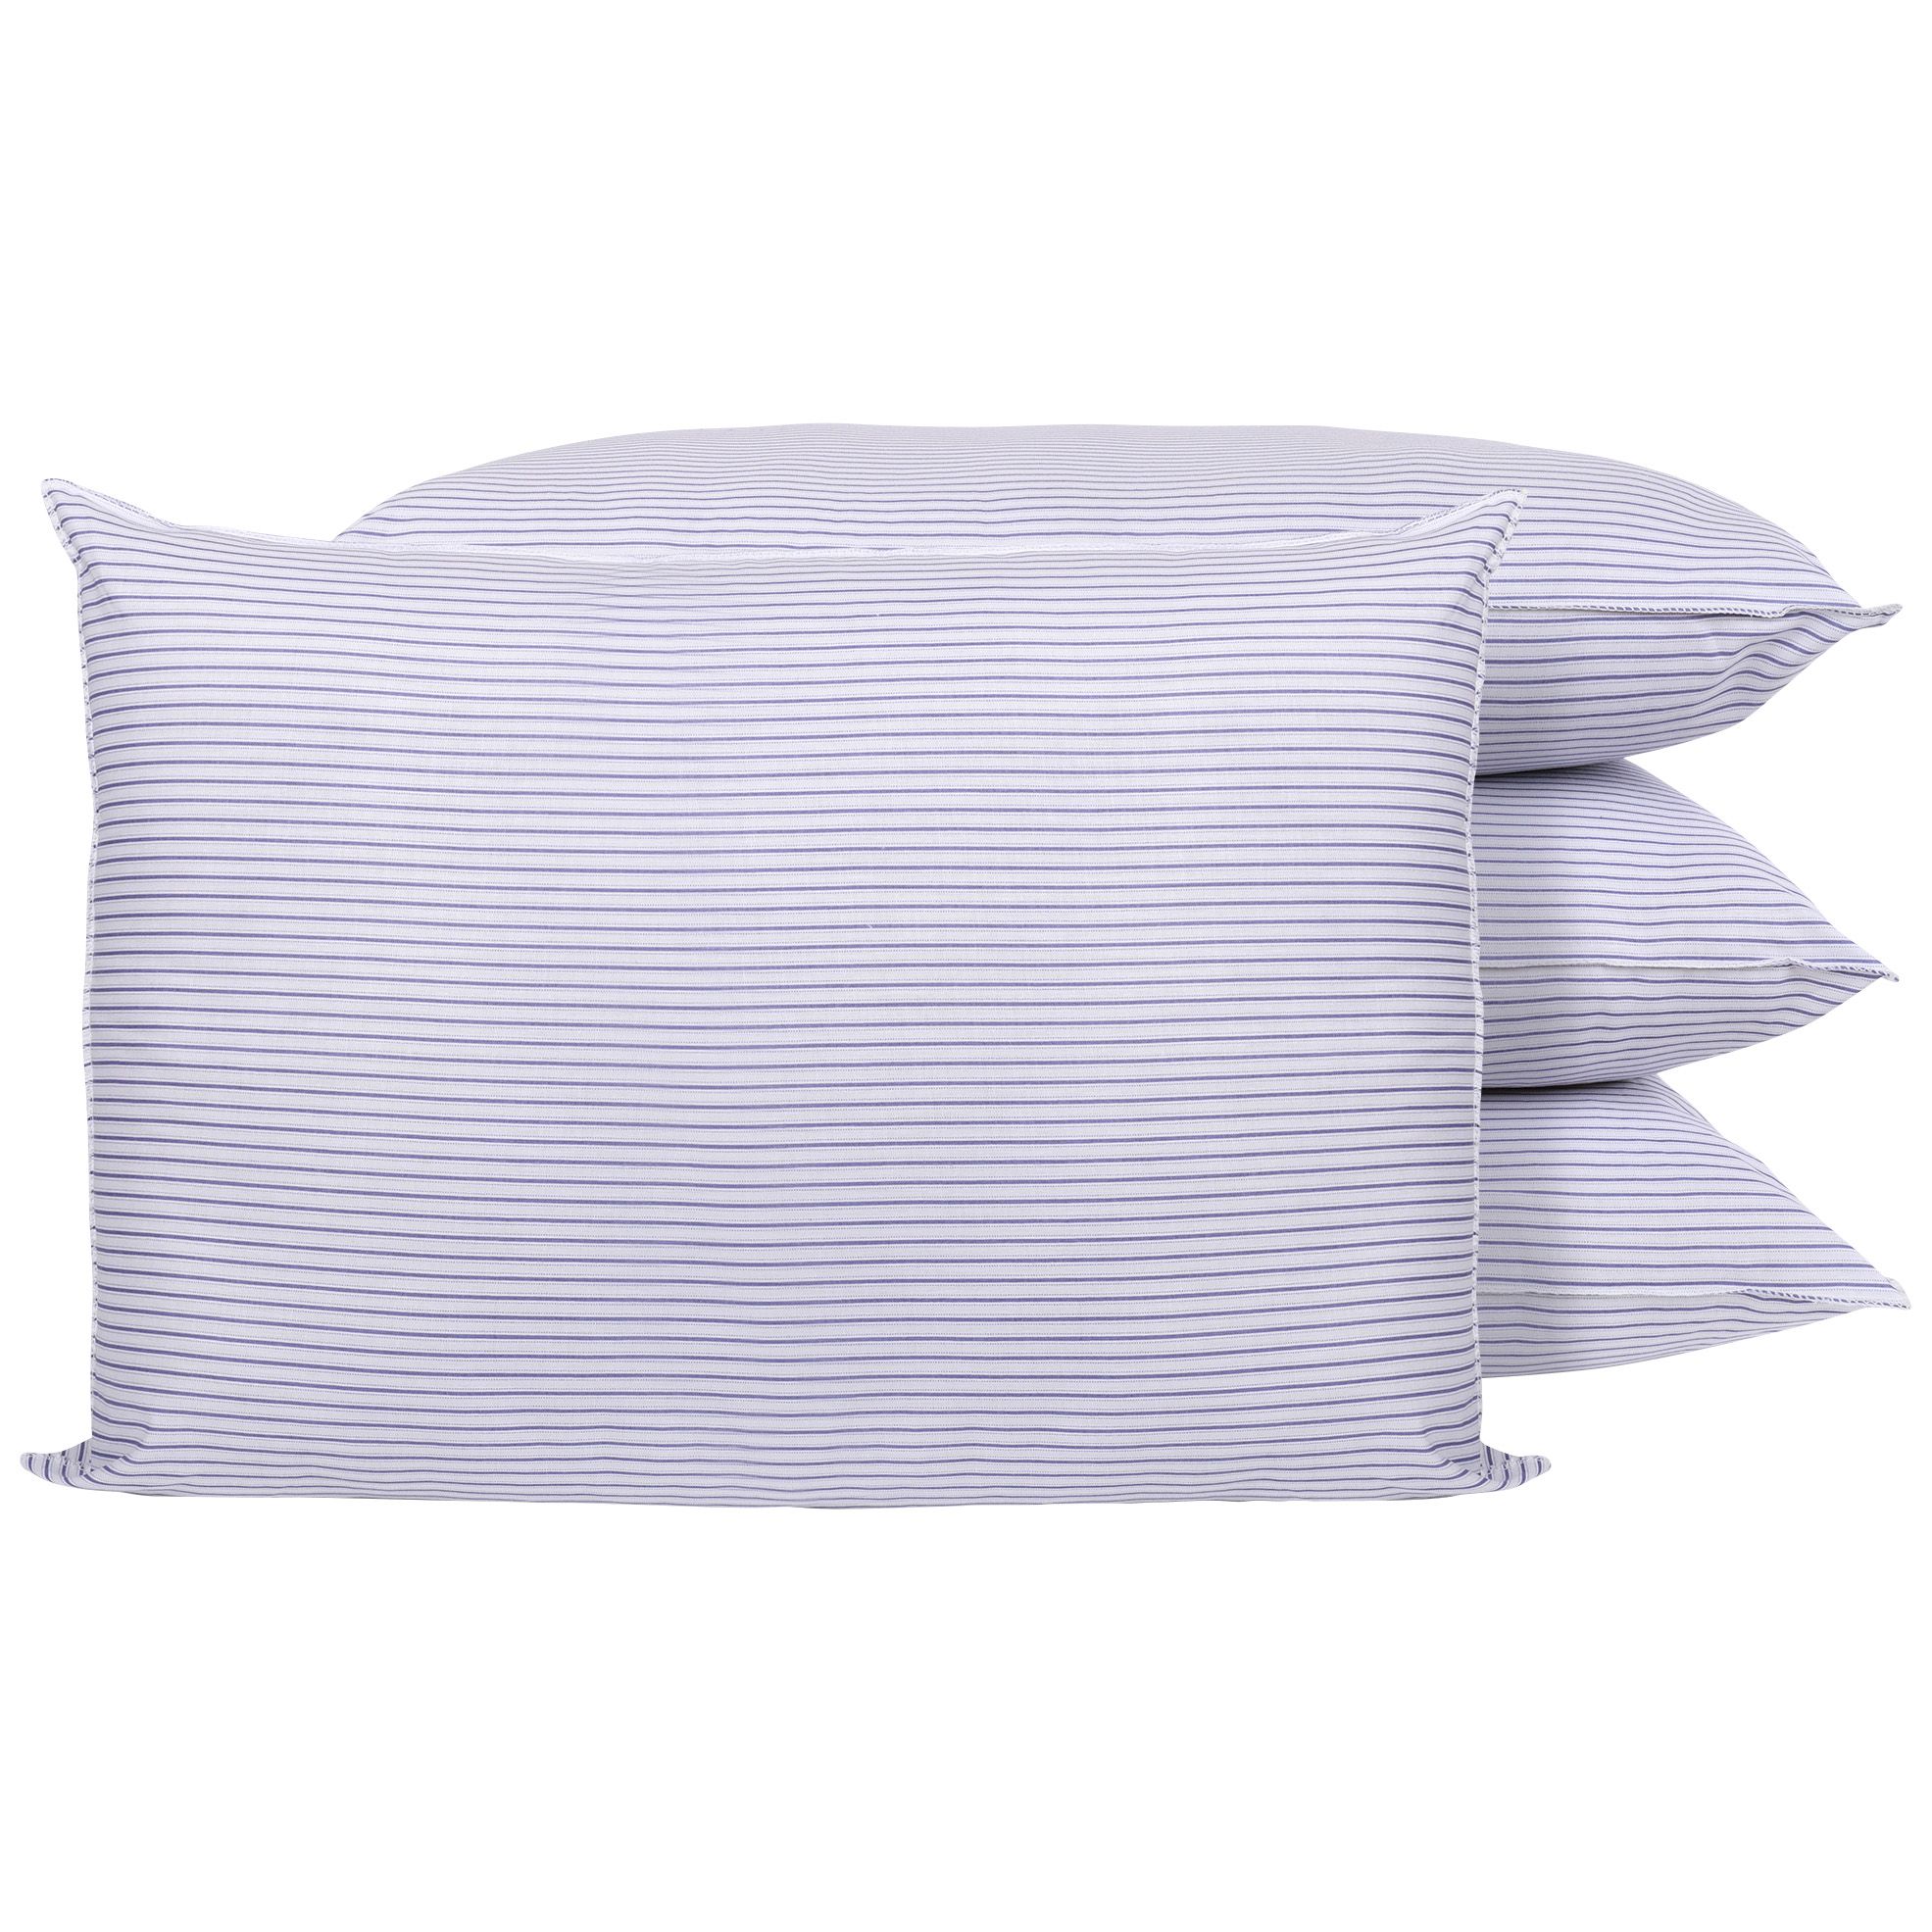  DreamSleep Home Gusseted Quilted Pillow, Standard